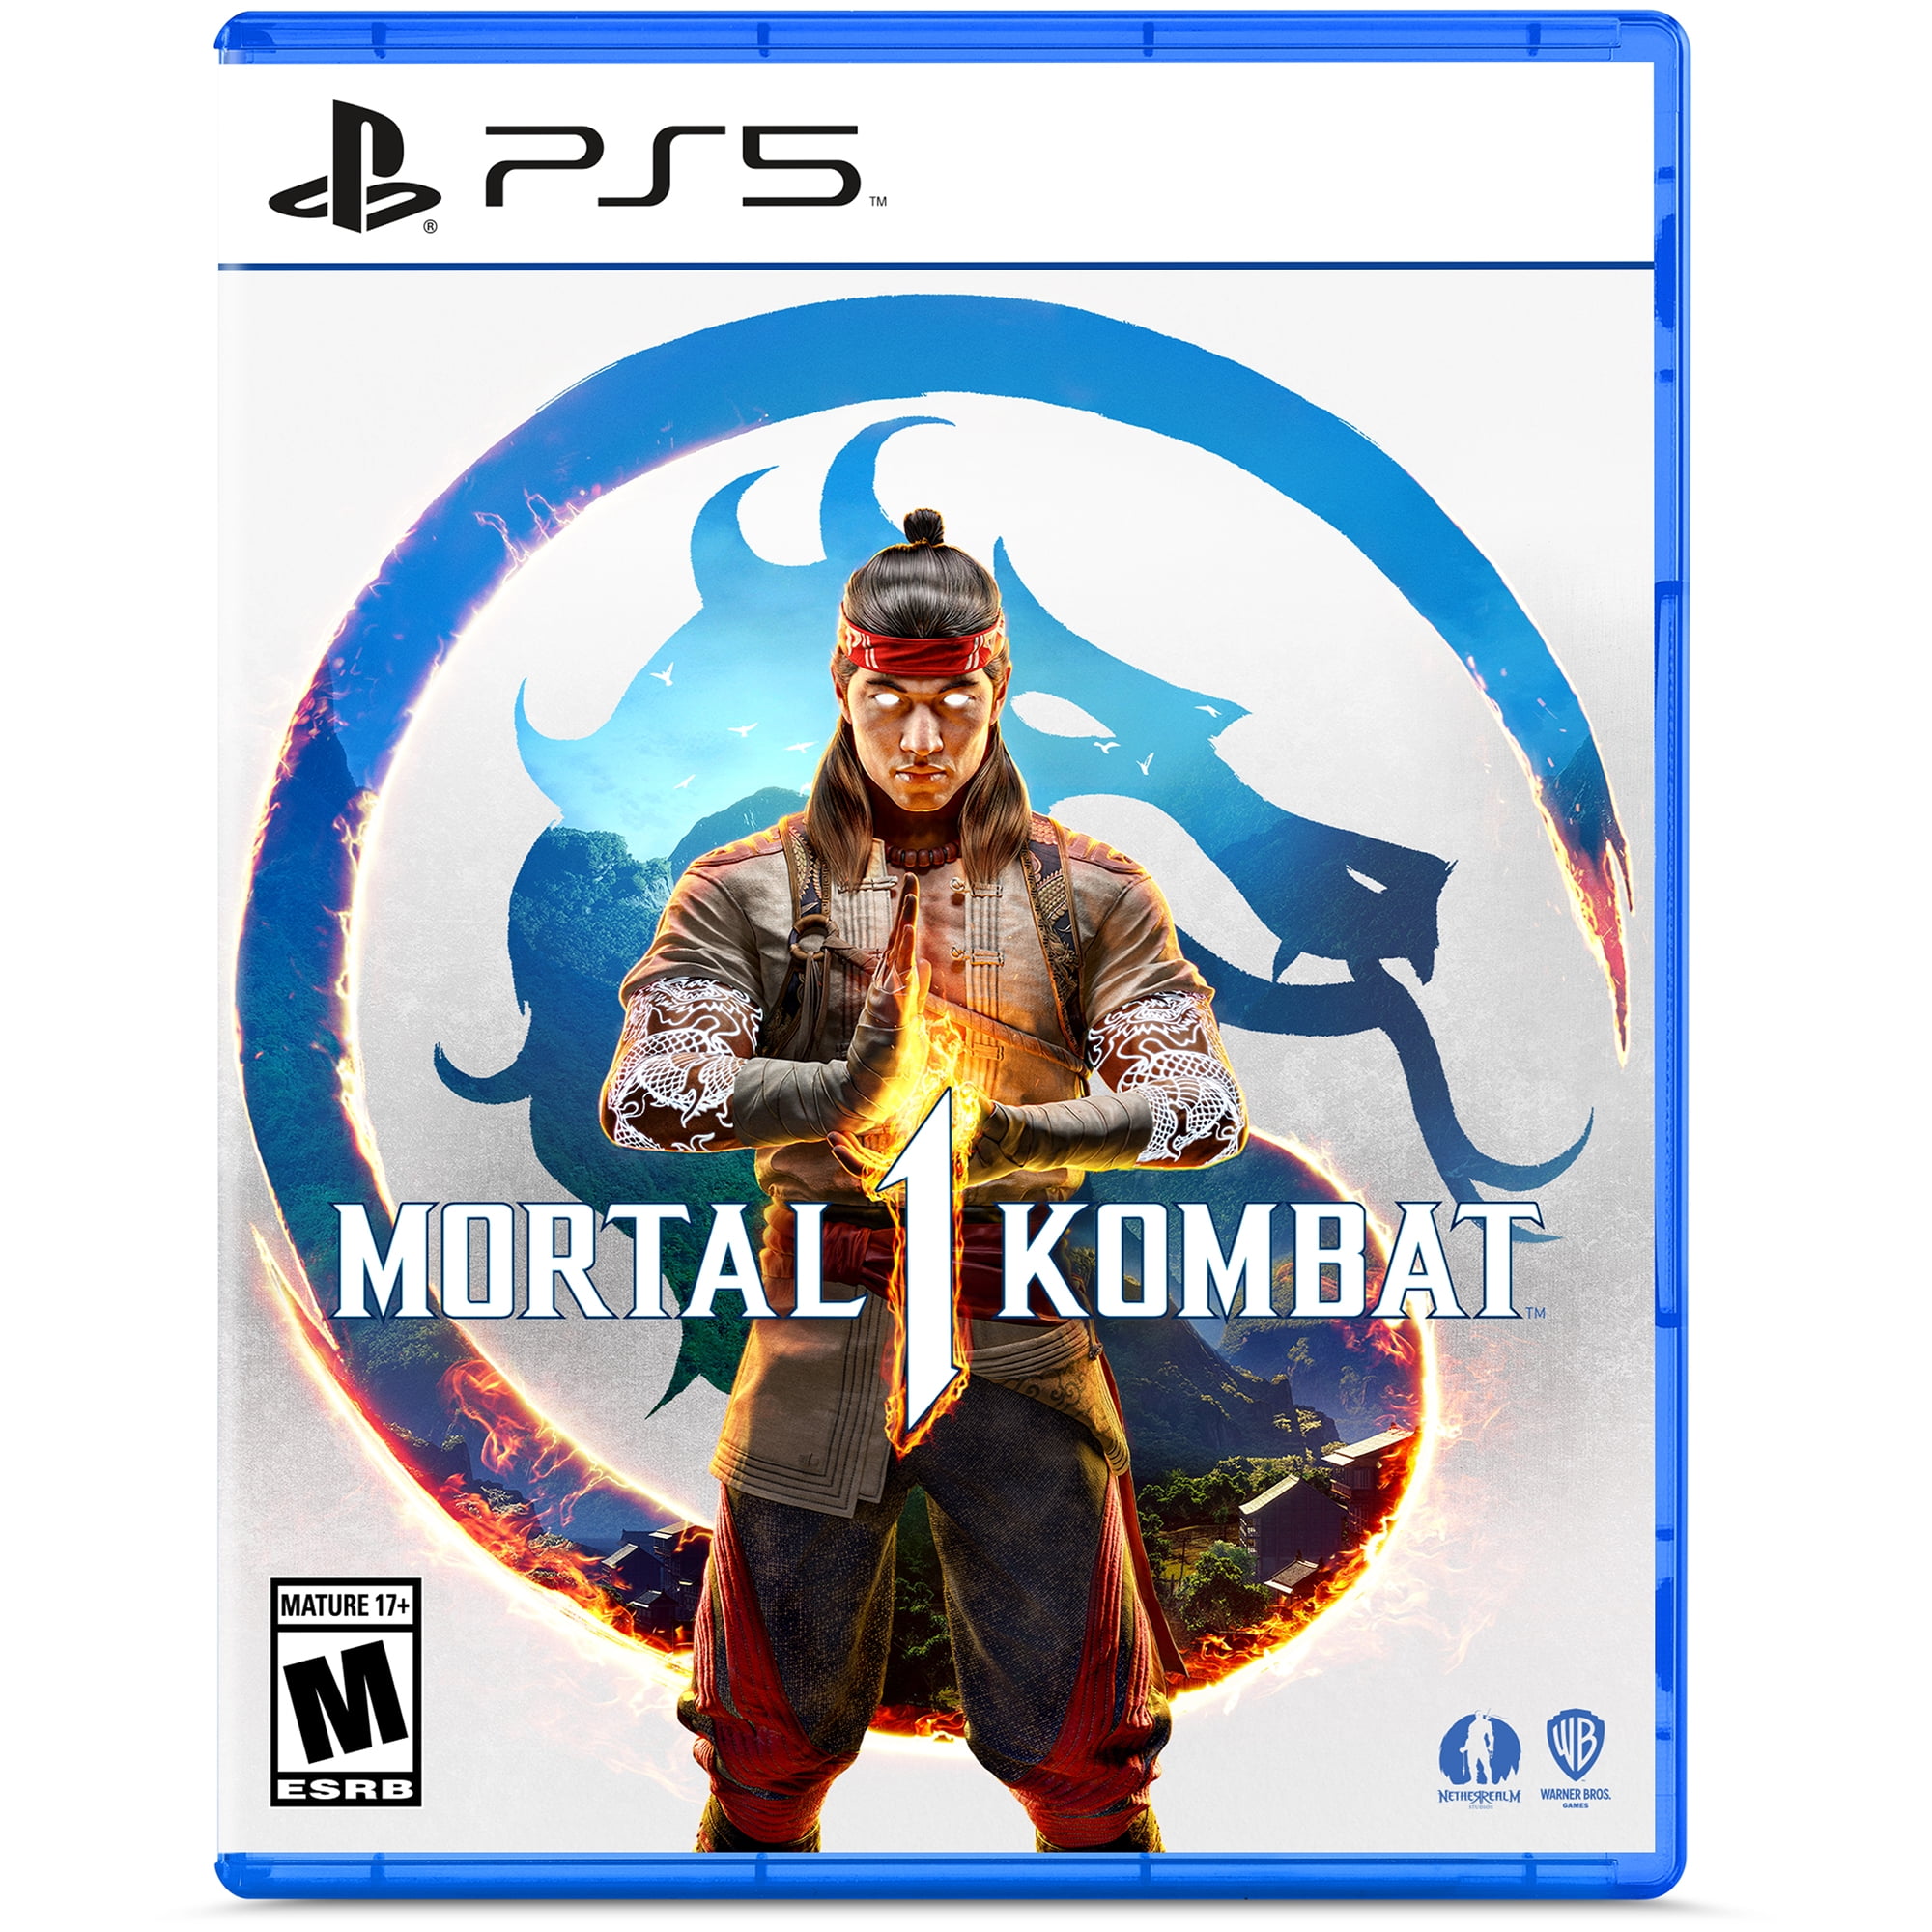 Mortal Kombat X Game Options are Red When I Start the Game. – Mortal Kombat  Games